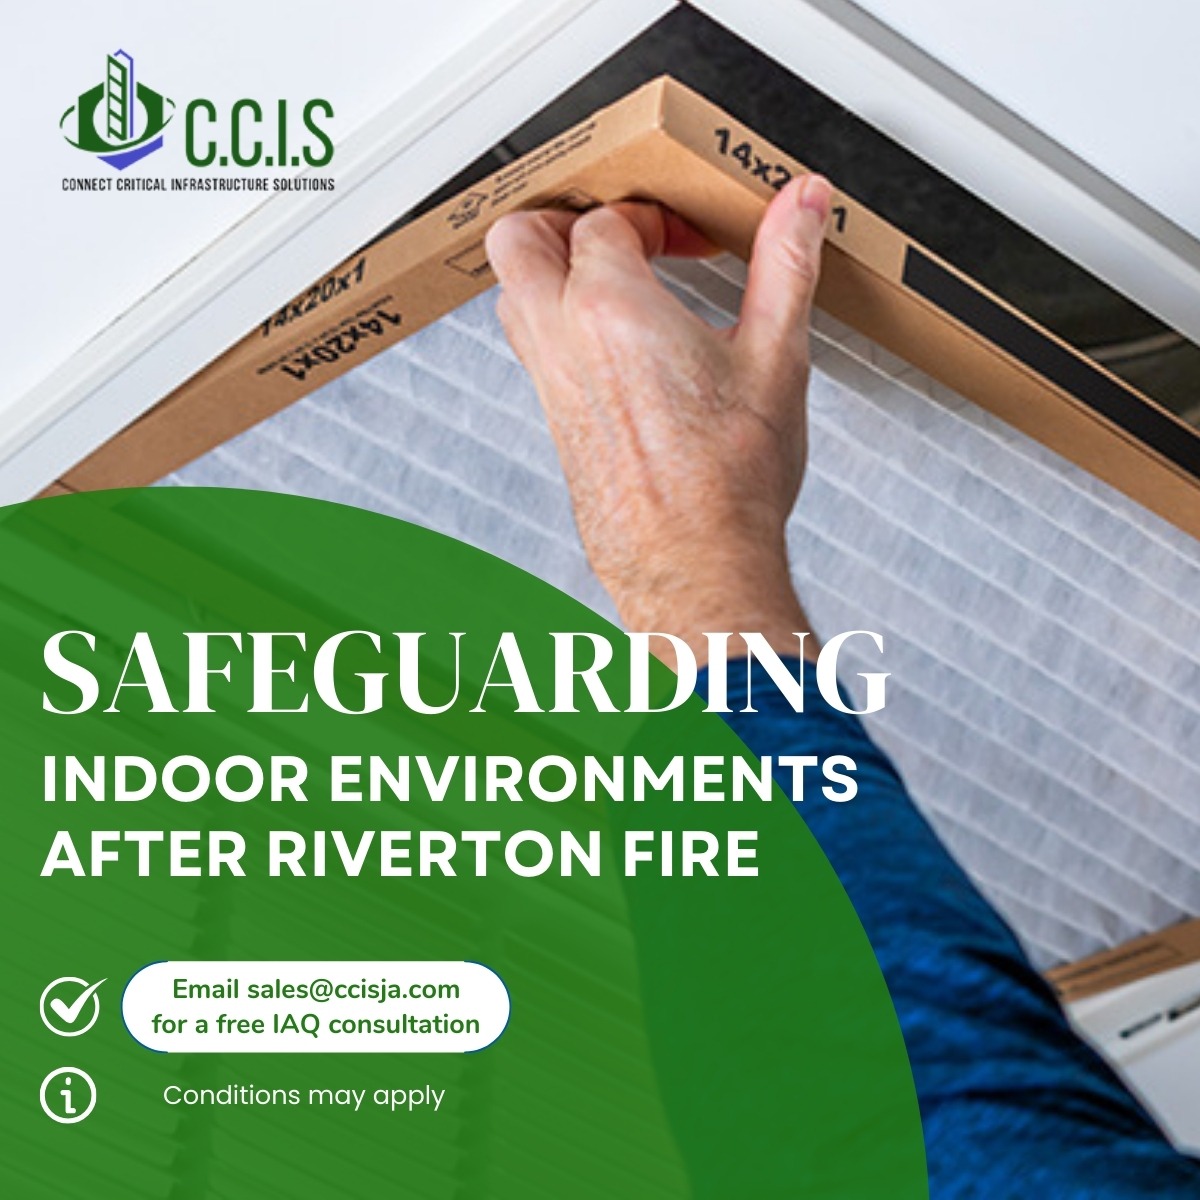 After the Riverton City dump fire, ensure indoor air quality. Equip cooling units with MERV-rated filters to remove pollutants. Let's breathe easier indoors!🍃
✅Visit our website: ccisja.com
✅Read Article: jamaicaobserver.com/2024/04/09/riv…
#RivertonFire
#CCIS